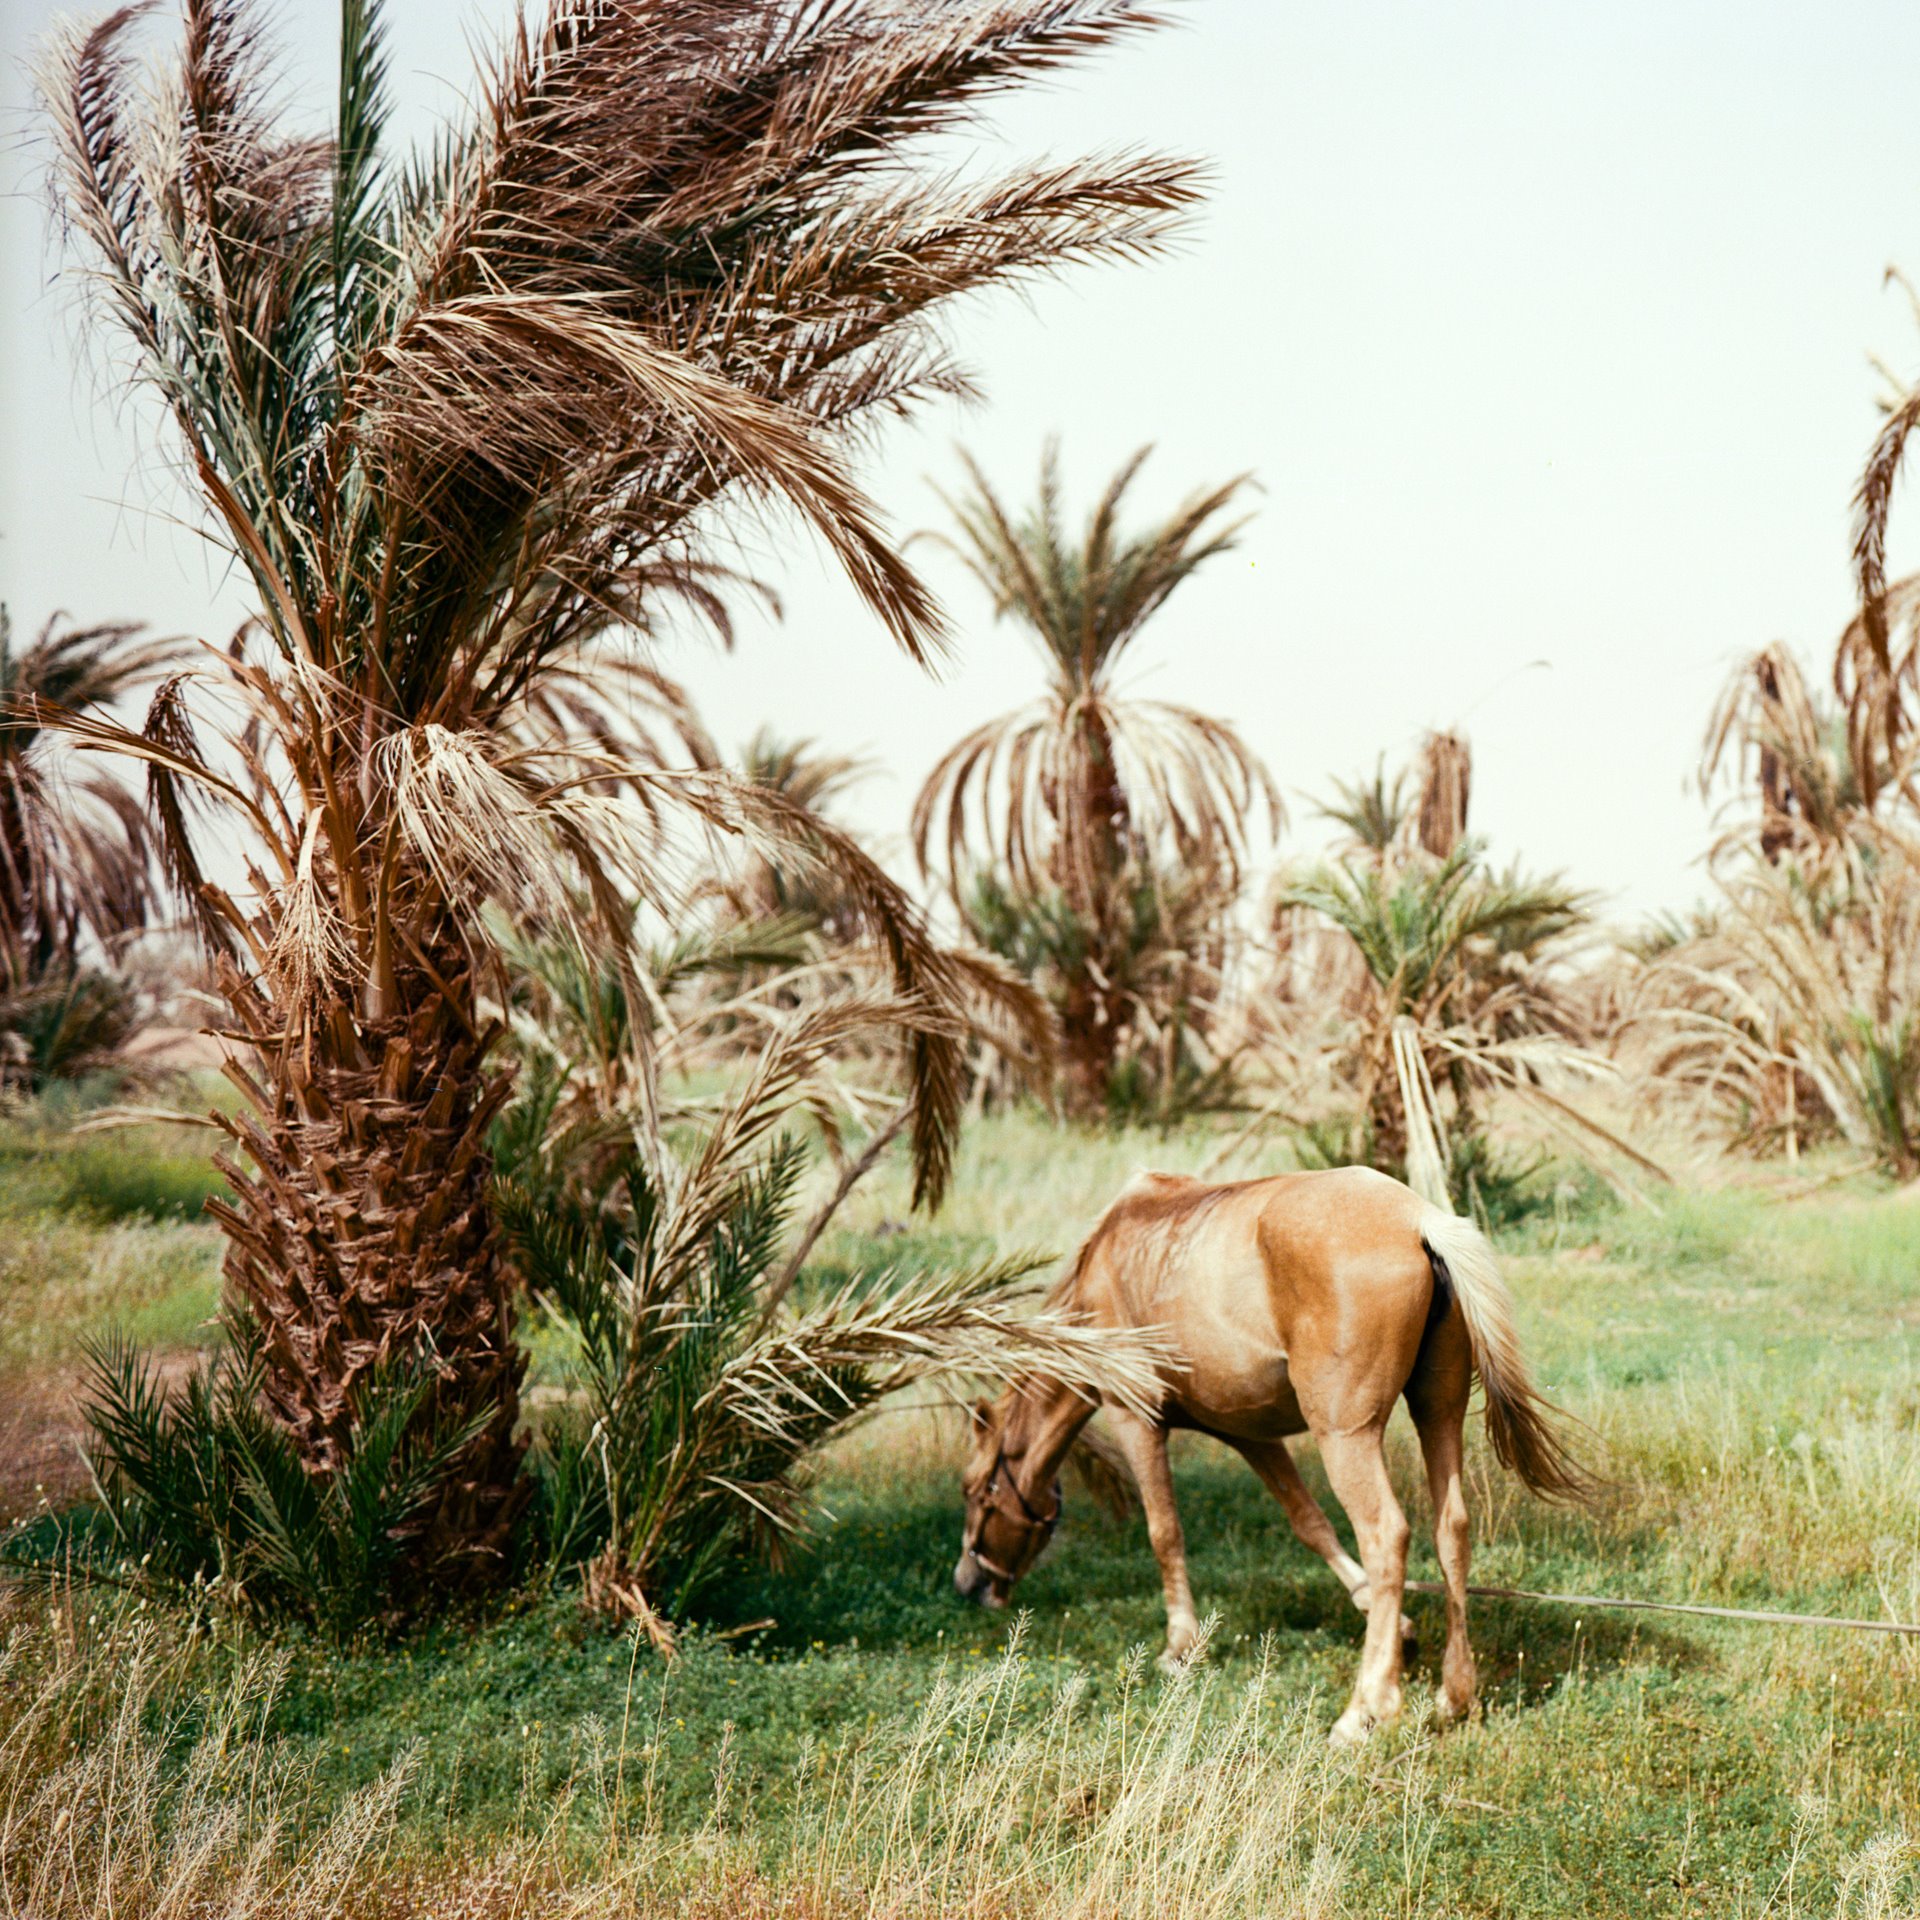 <p>A horse grazes at M&#39;hamid El Ghizlane Oasis, which is home to around 7,500 people, in southern Morocco.</p>
